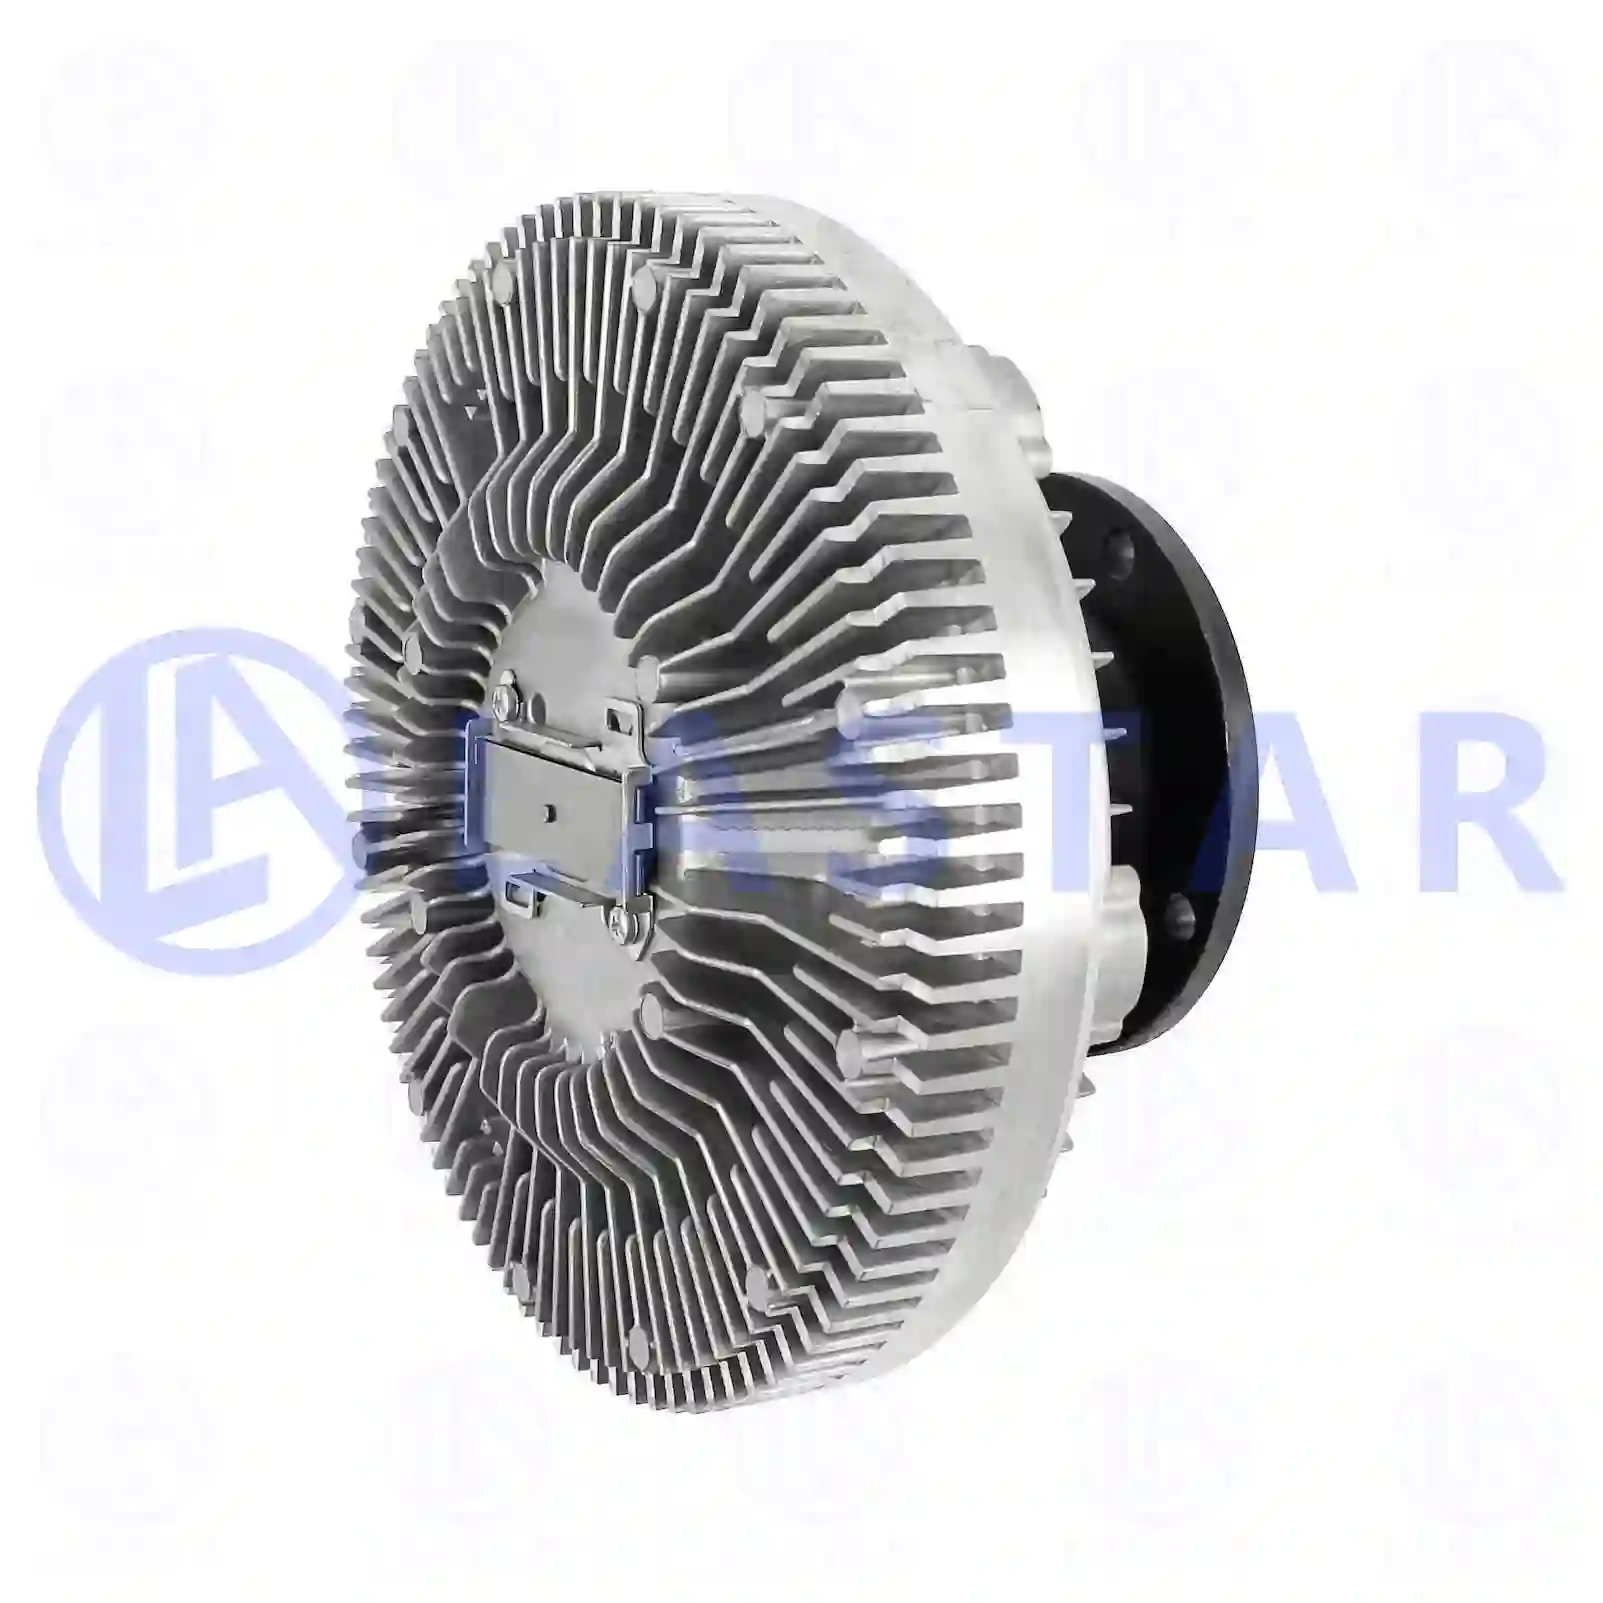 Fan clutch, 77708833, 41210010, 4121399 ||  77708833 Lastar Spare Part | Truck Spare Parts, Auotomotive Spare Parts Fan clutch, 77708833, 41210010, 4121399 ||  77708833 Lastar Spare Part | Truck Spare Parts, Auotomotive Spare Parts